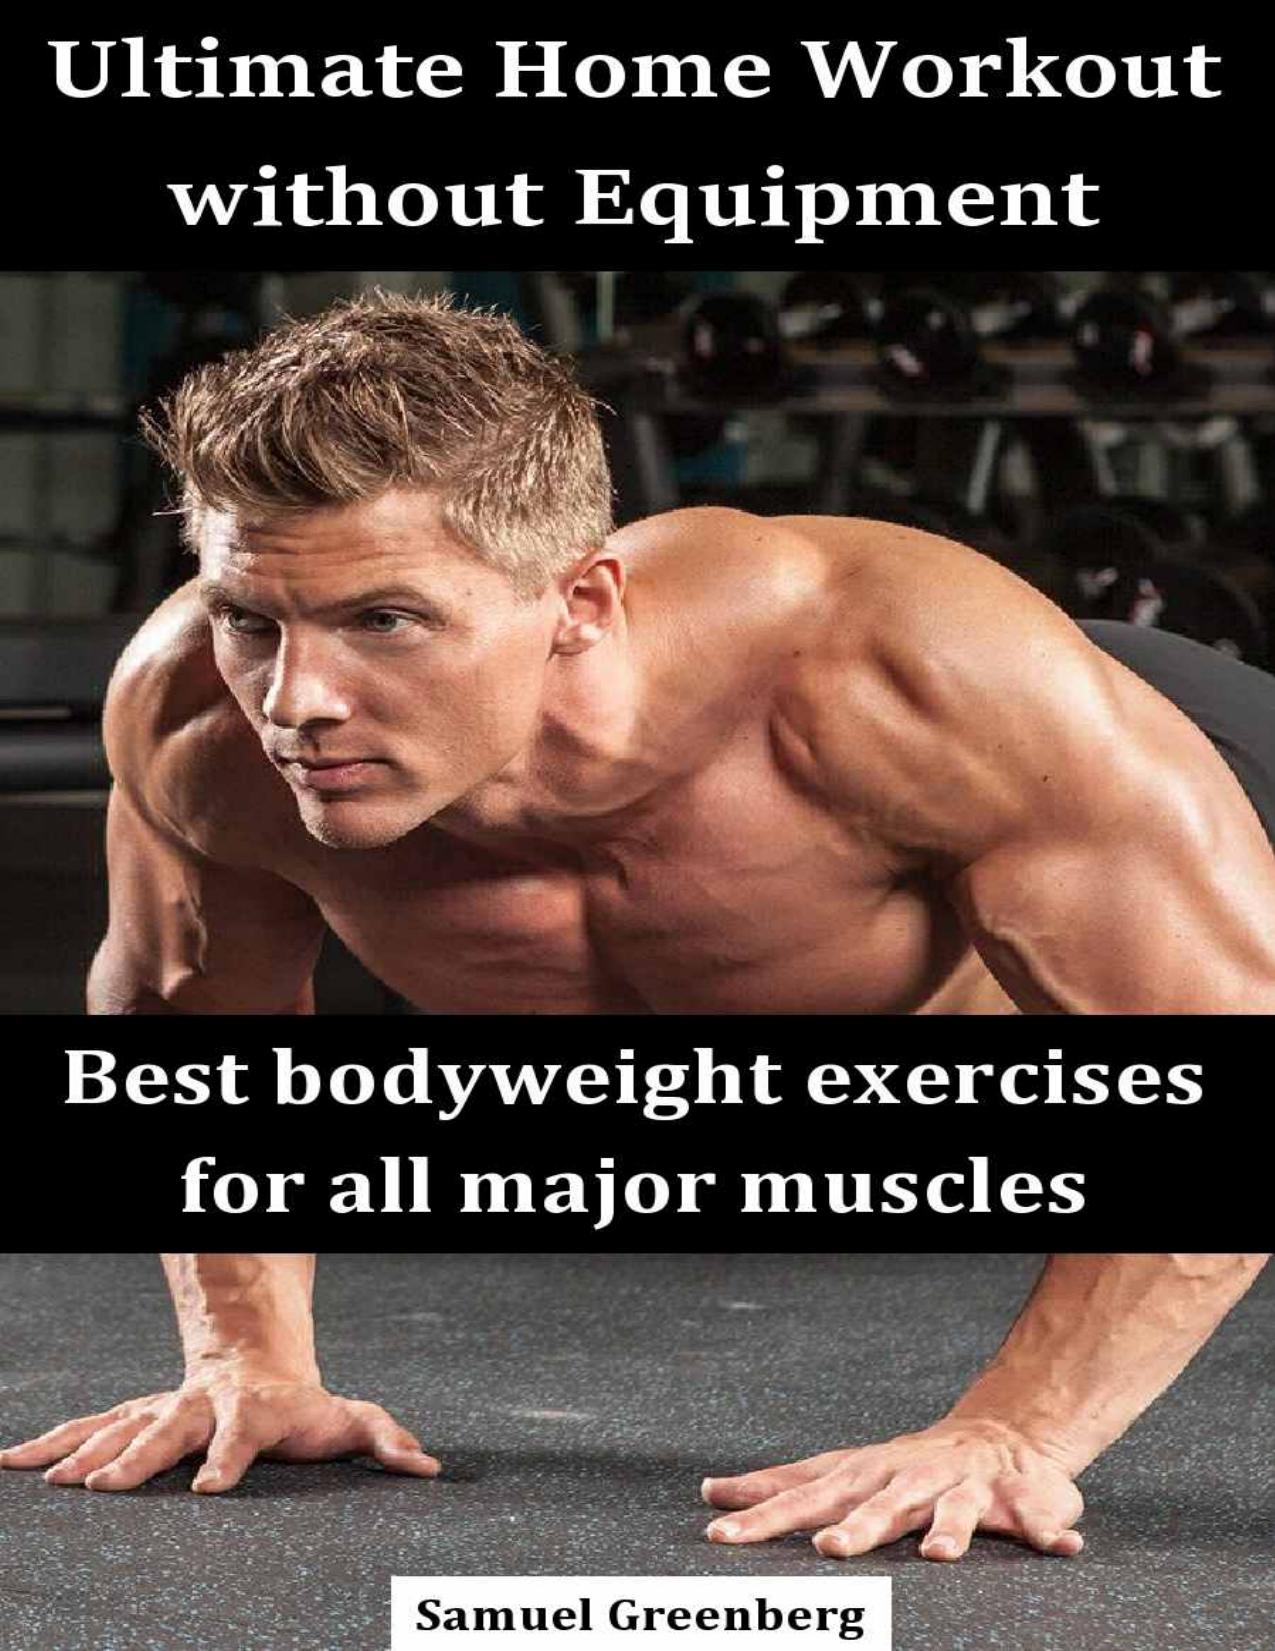 Ultimate Home Workout without Equipment: Best bodyweight exercises for all major muscles by Samuel Greenberg